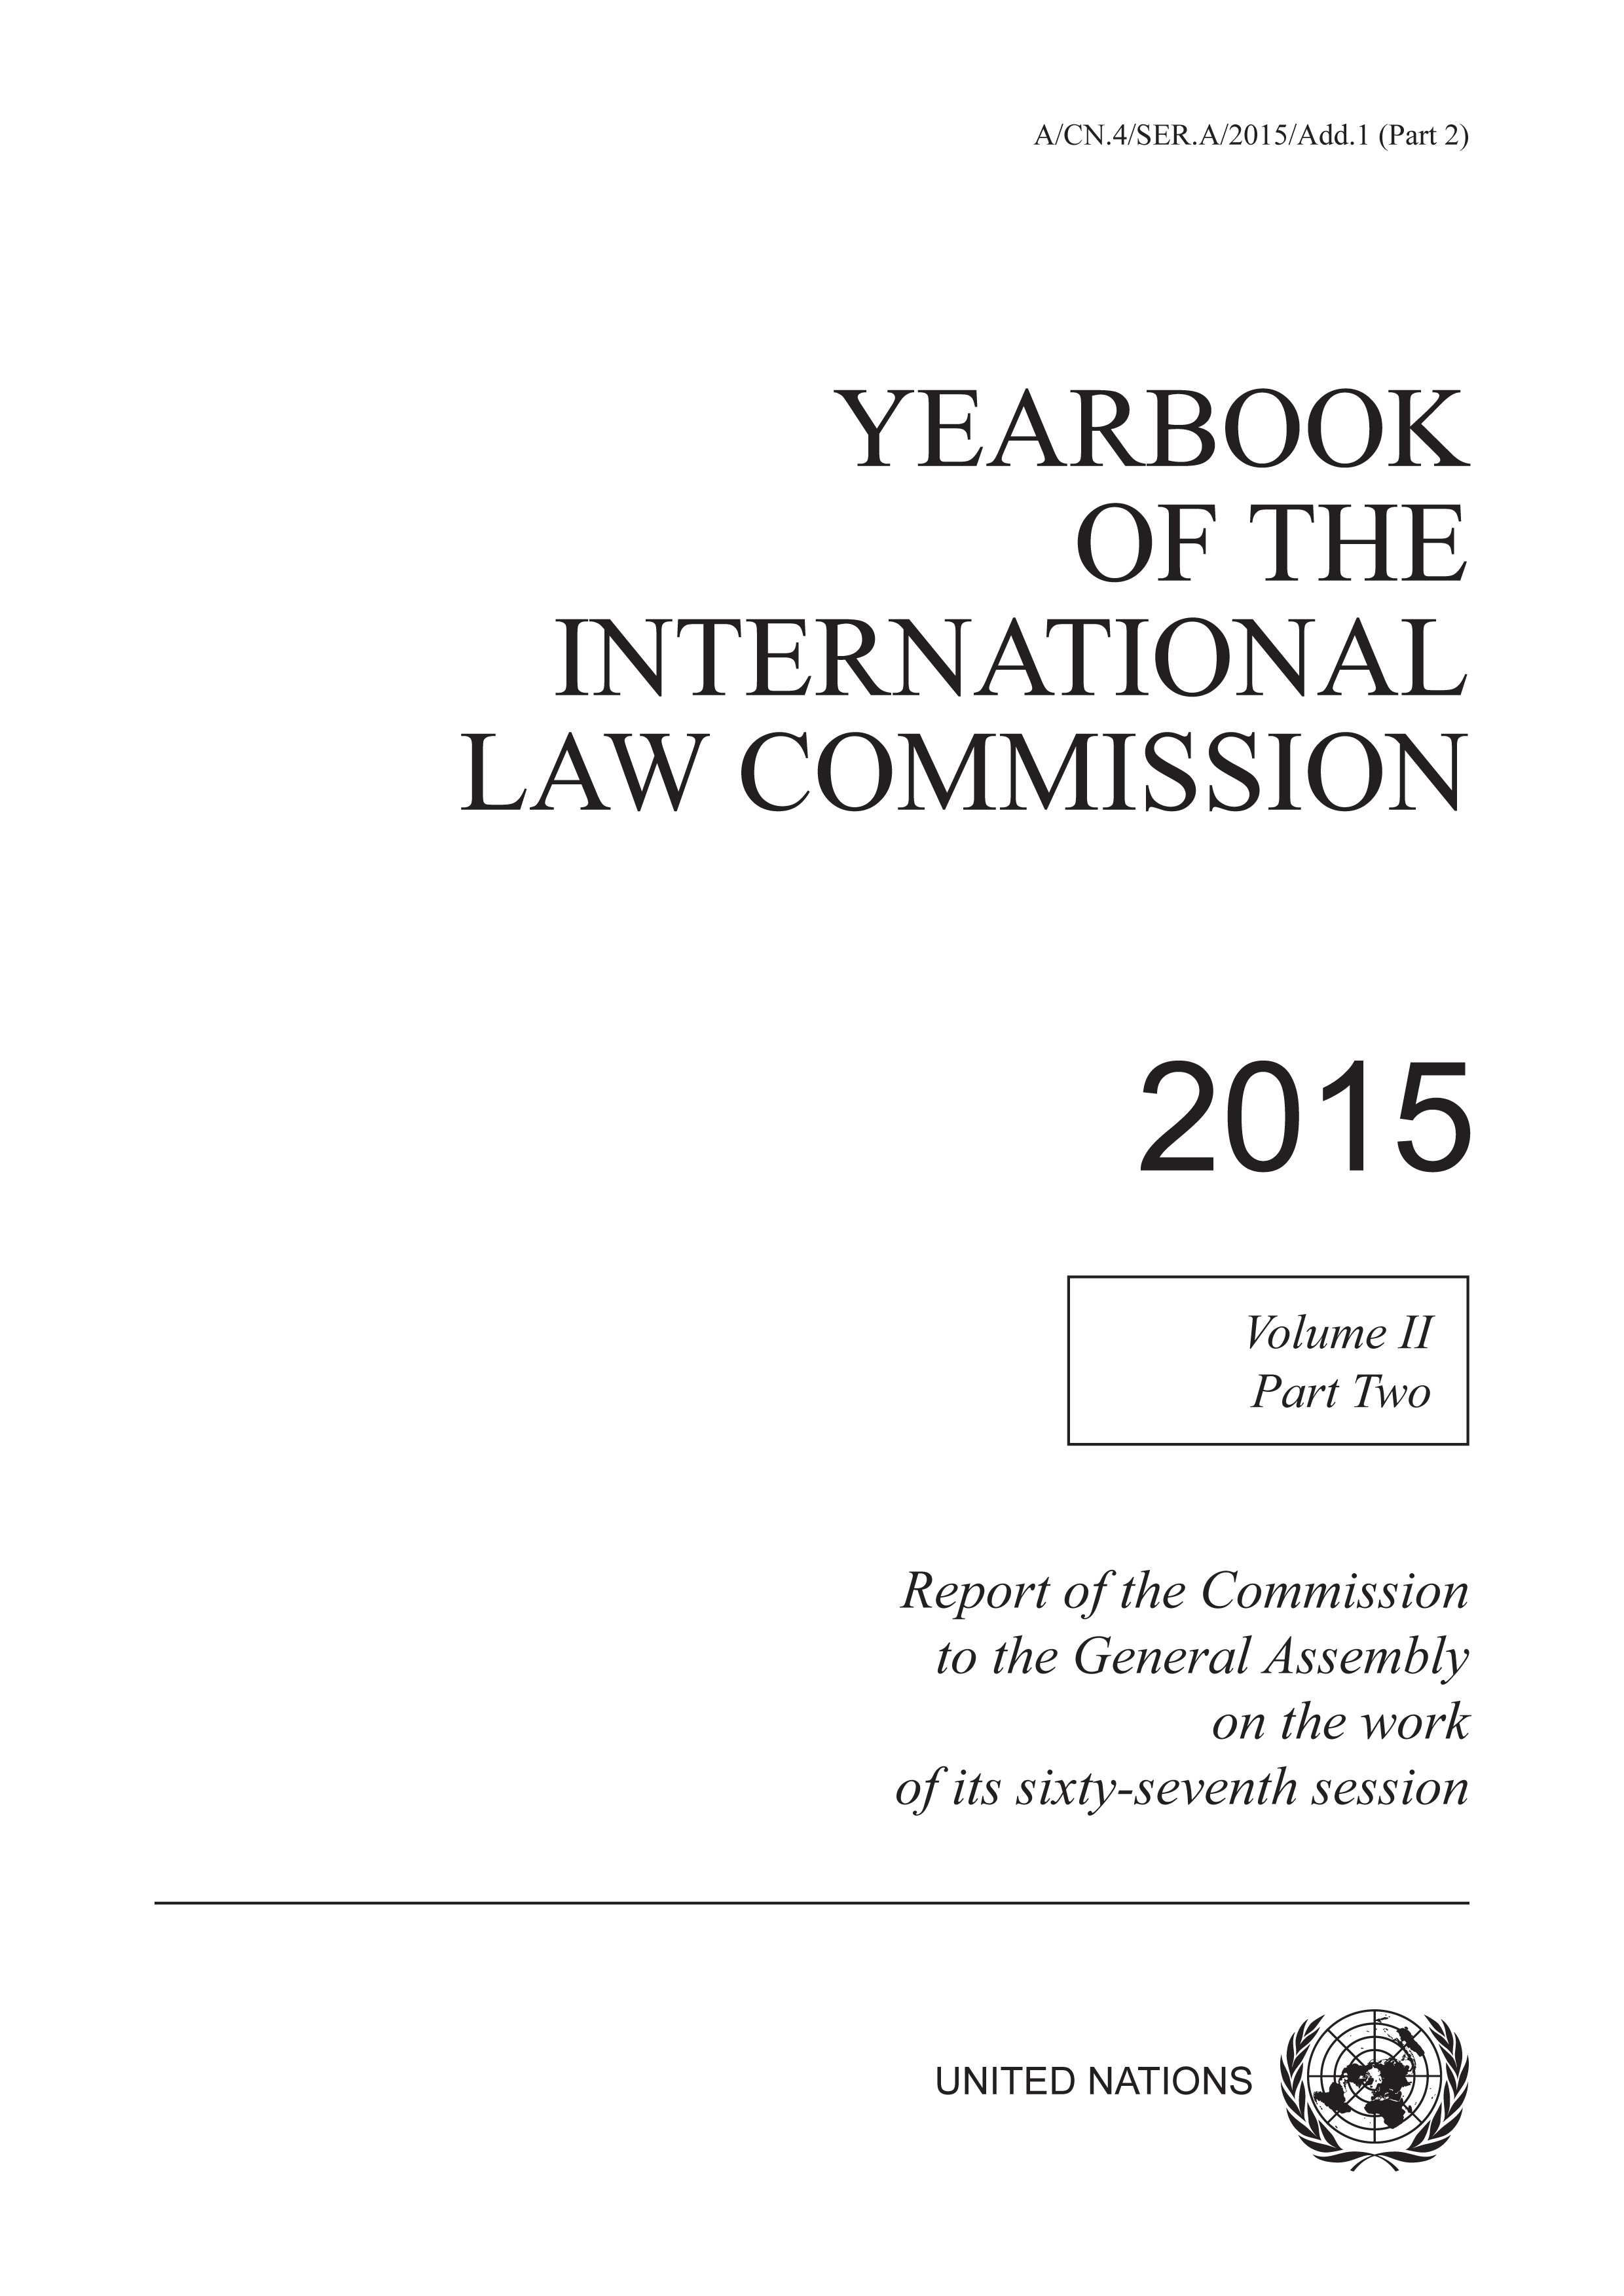 image of Summary of the work of the Commission at its sixty-seventh session